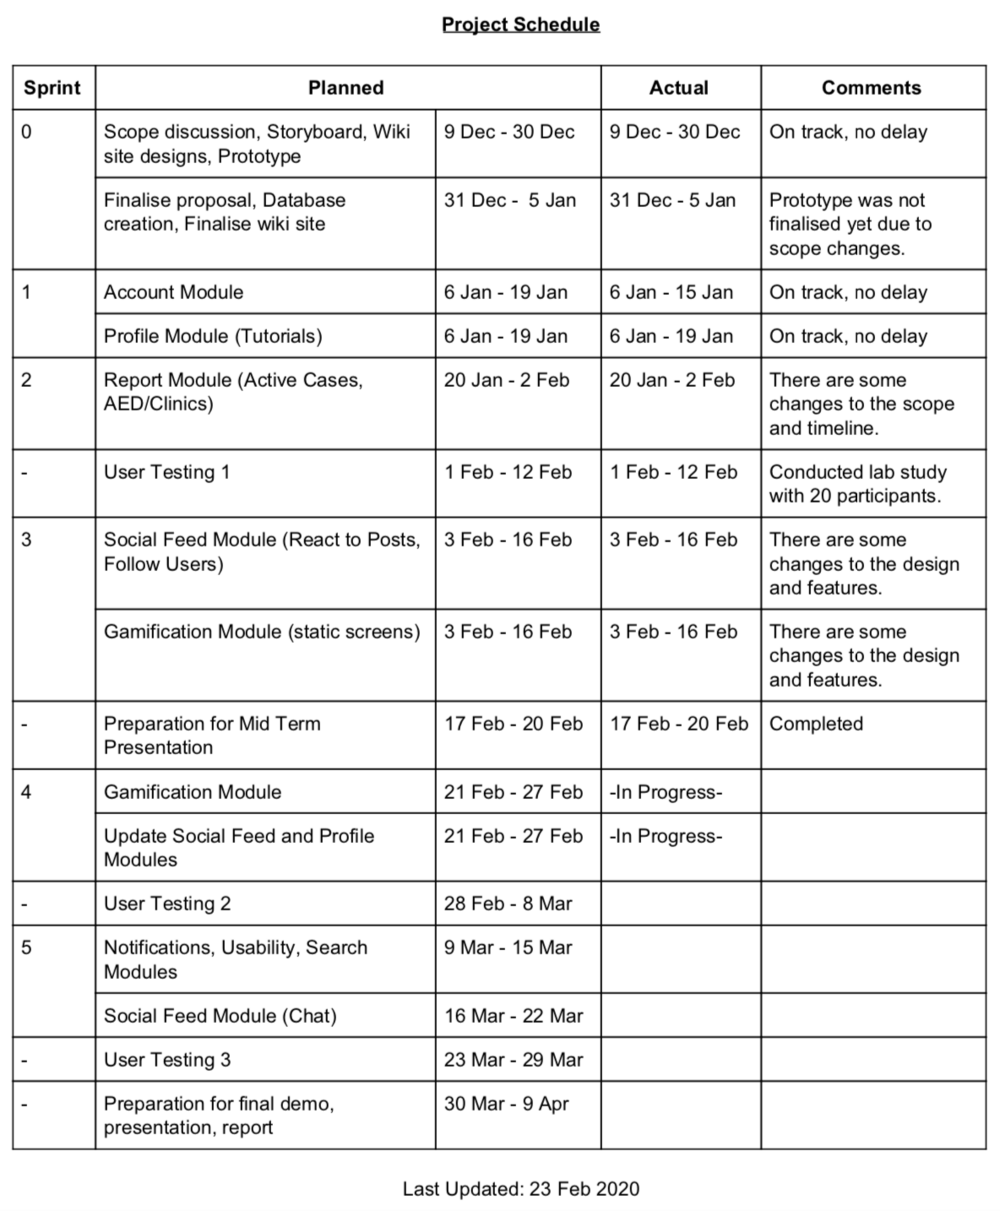 Project schedule on 23 feb.png